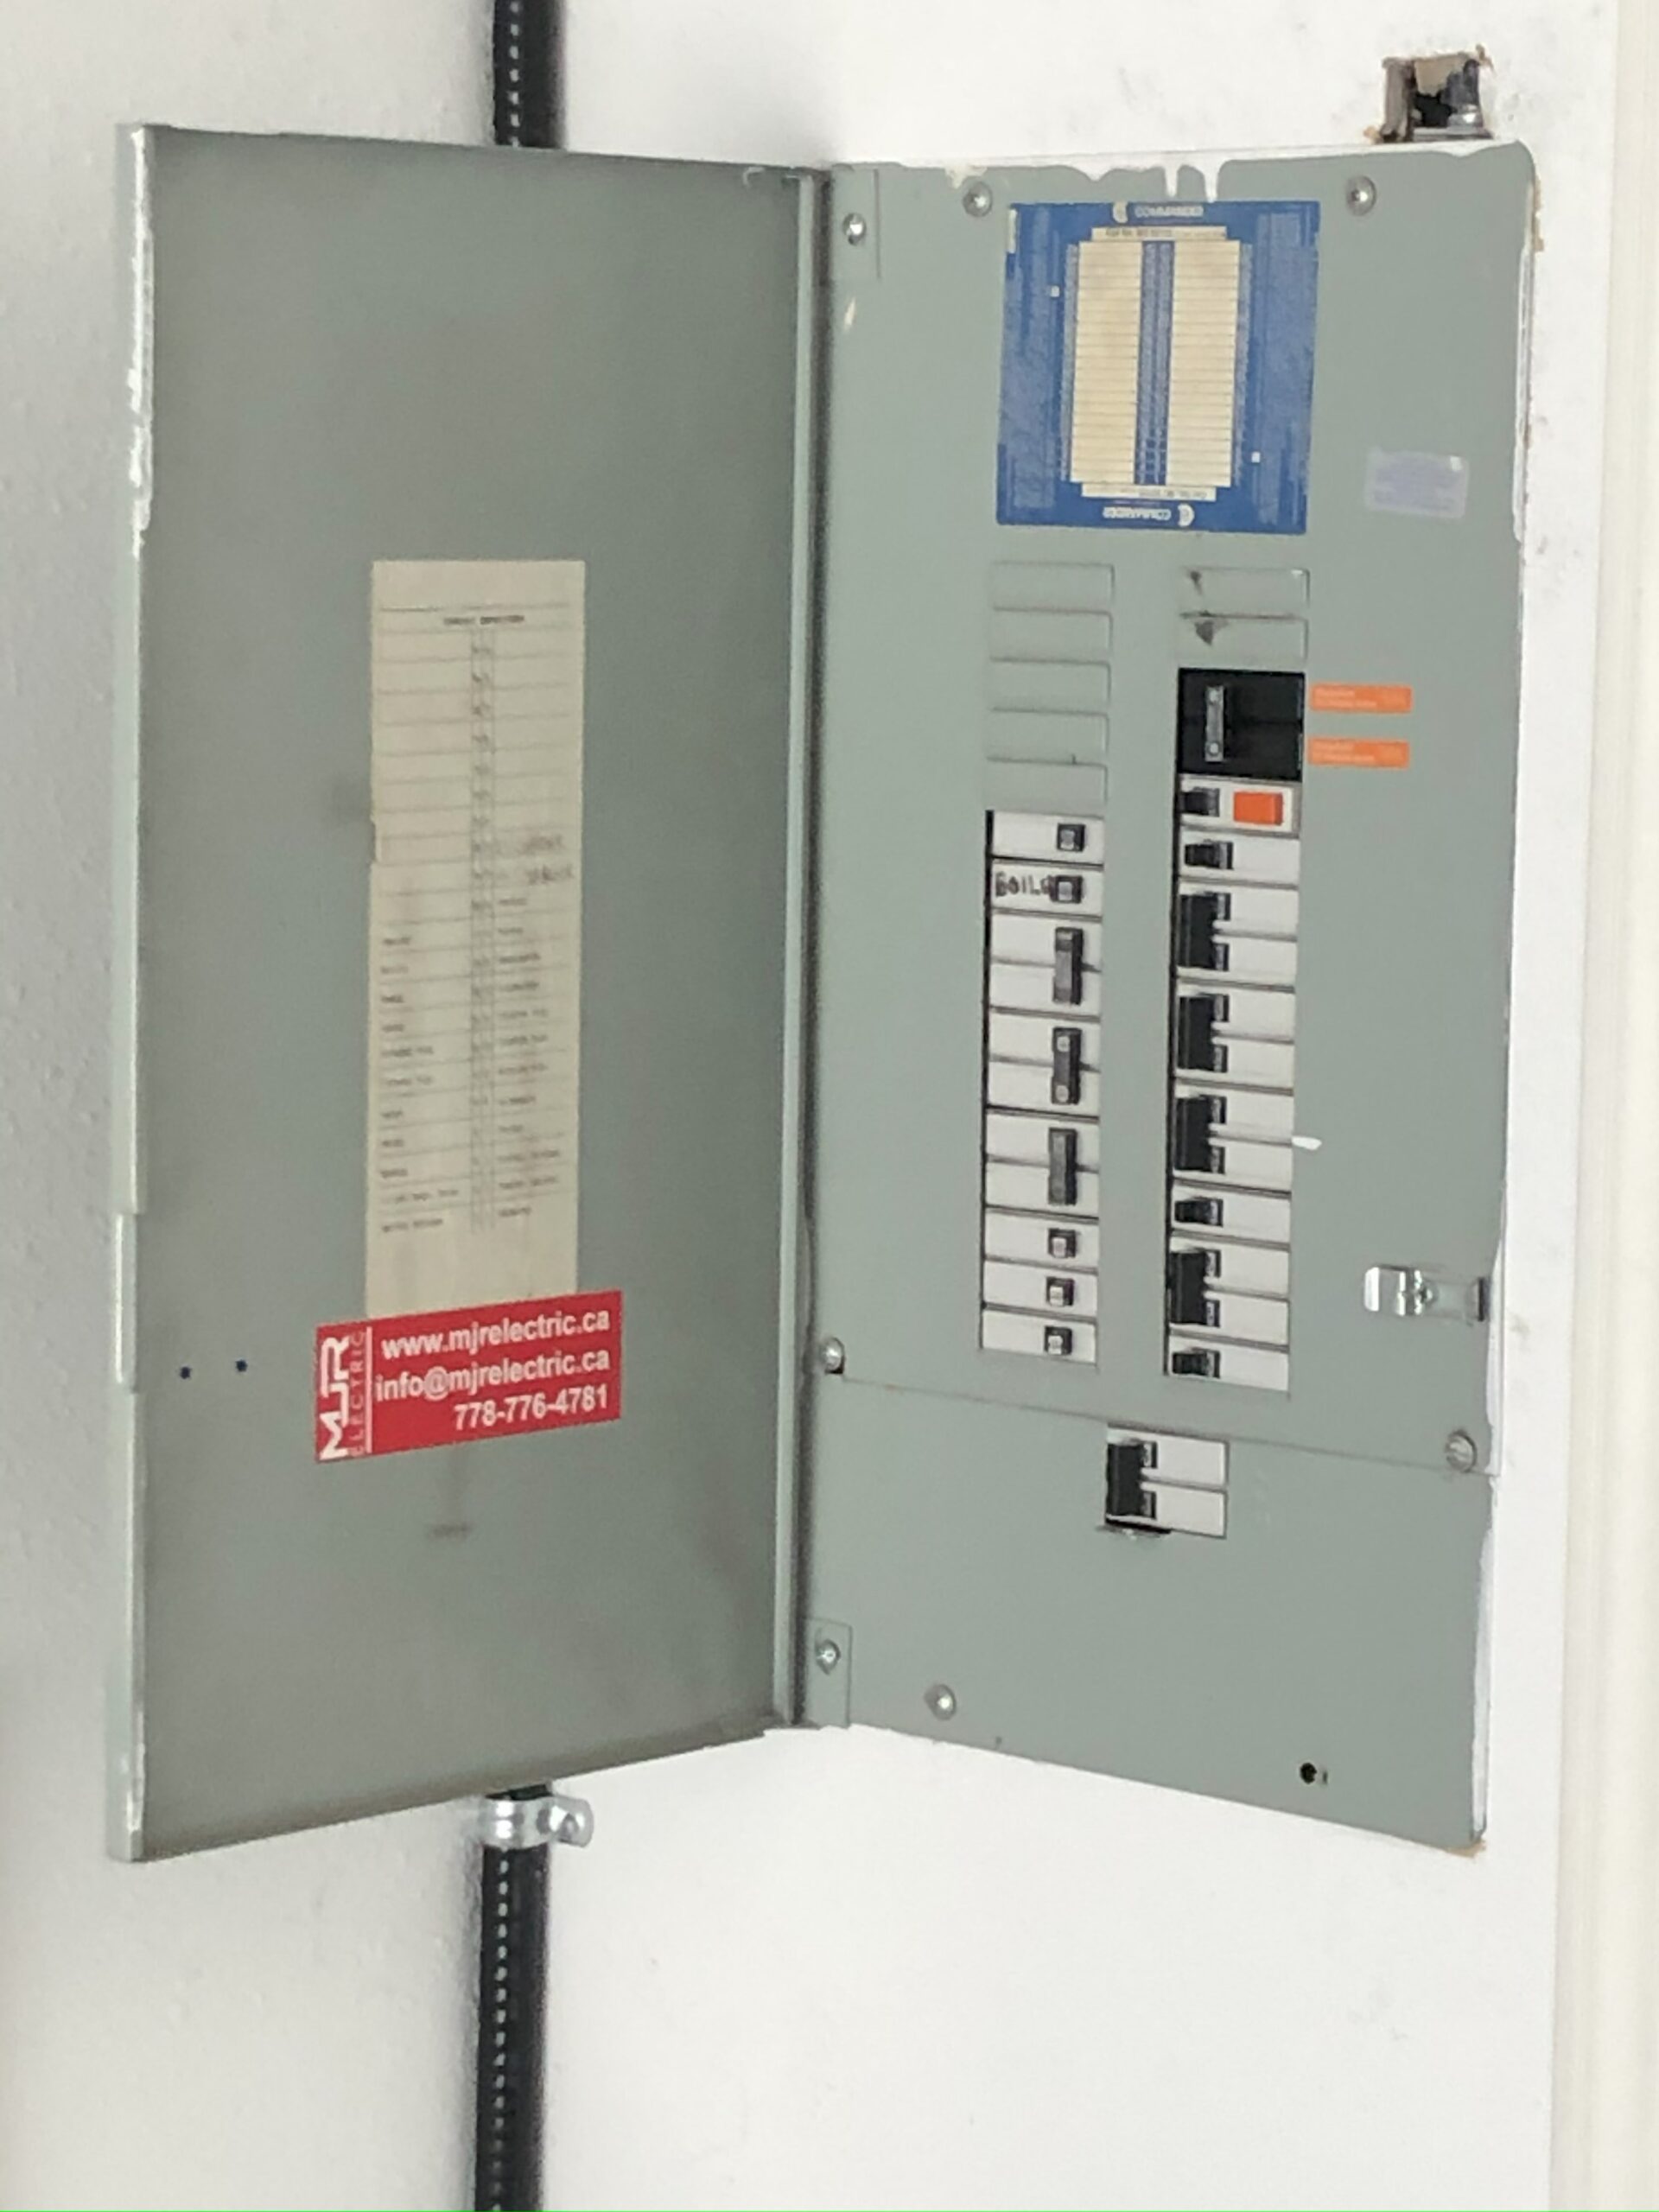 Regular Maintenance or Electrical Panel Upgrades for Safe and Modern Electrical System in Homes